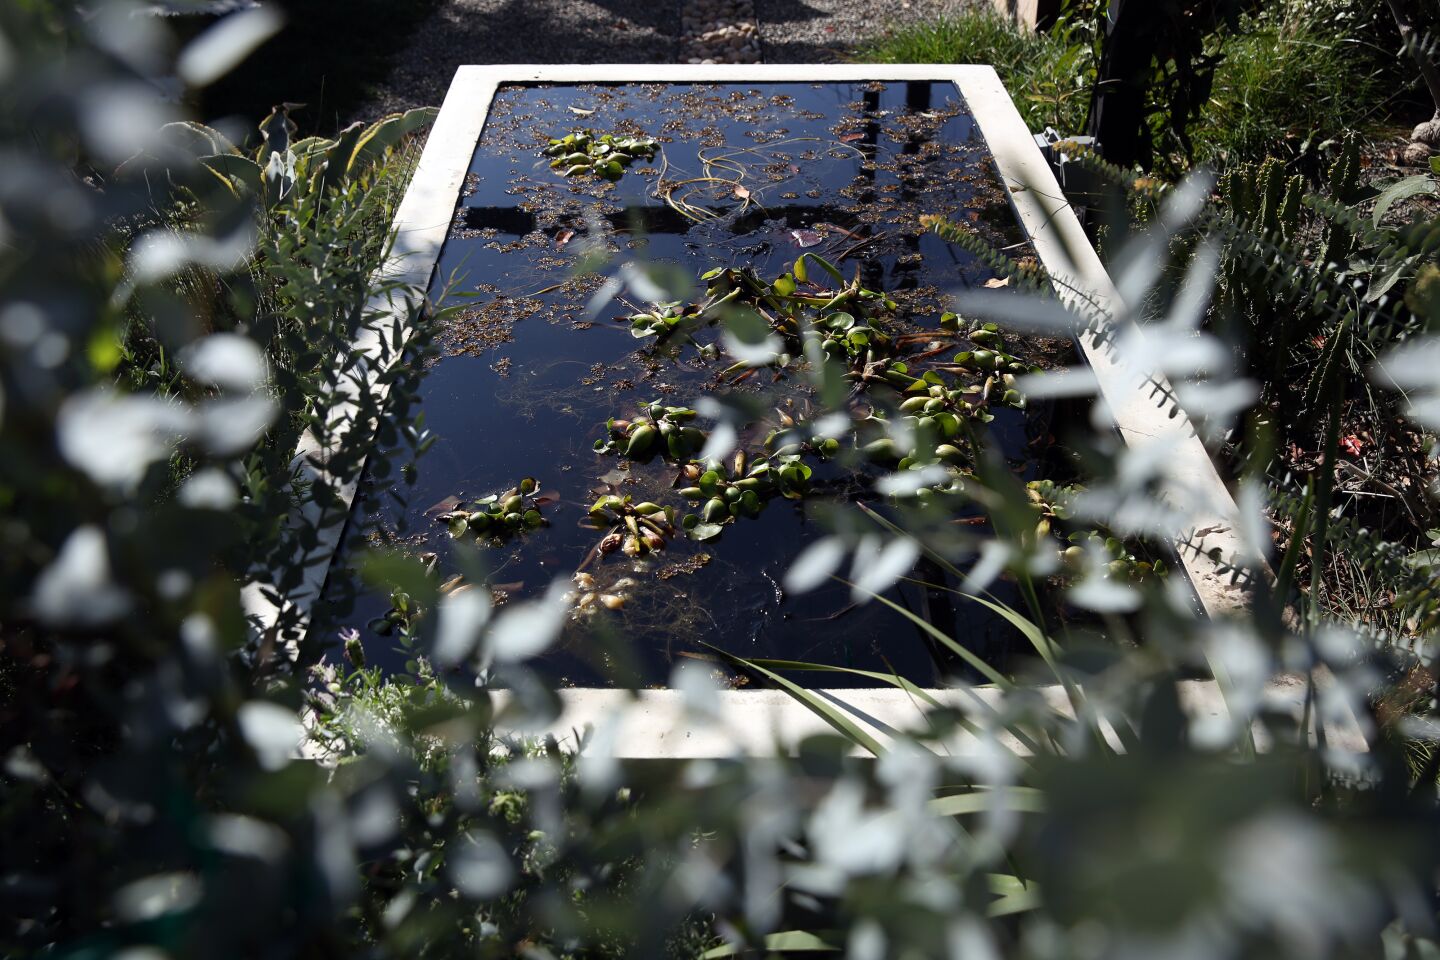 A fish pond filled with waterlilies is a refuge for ducks, birds and kids.